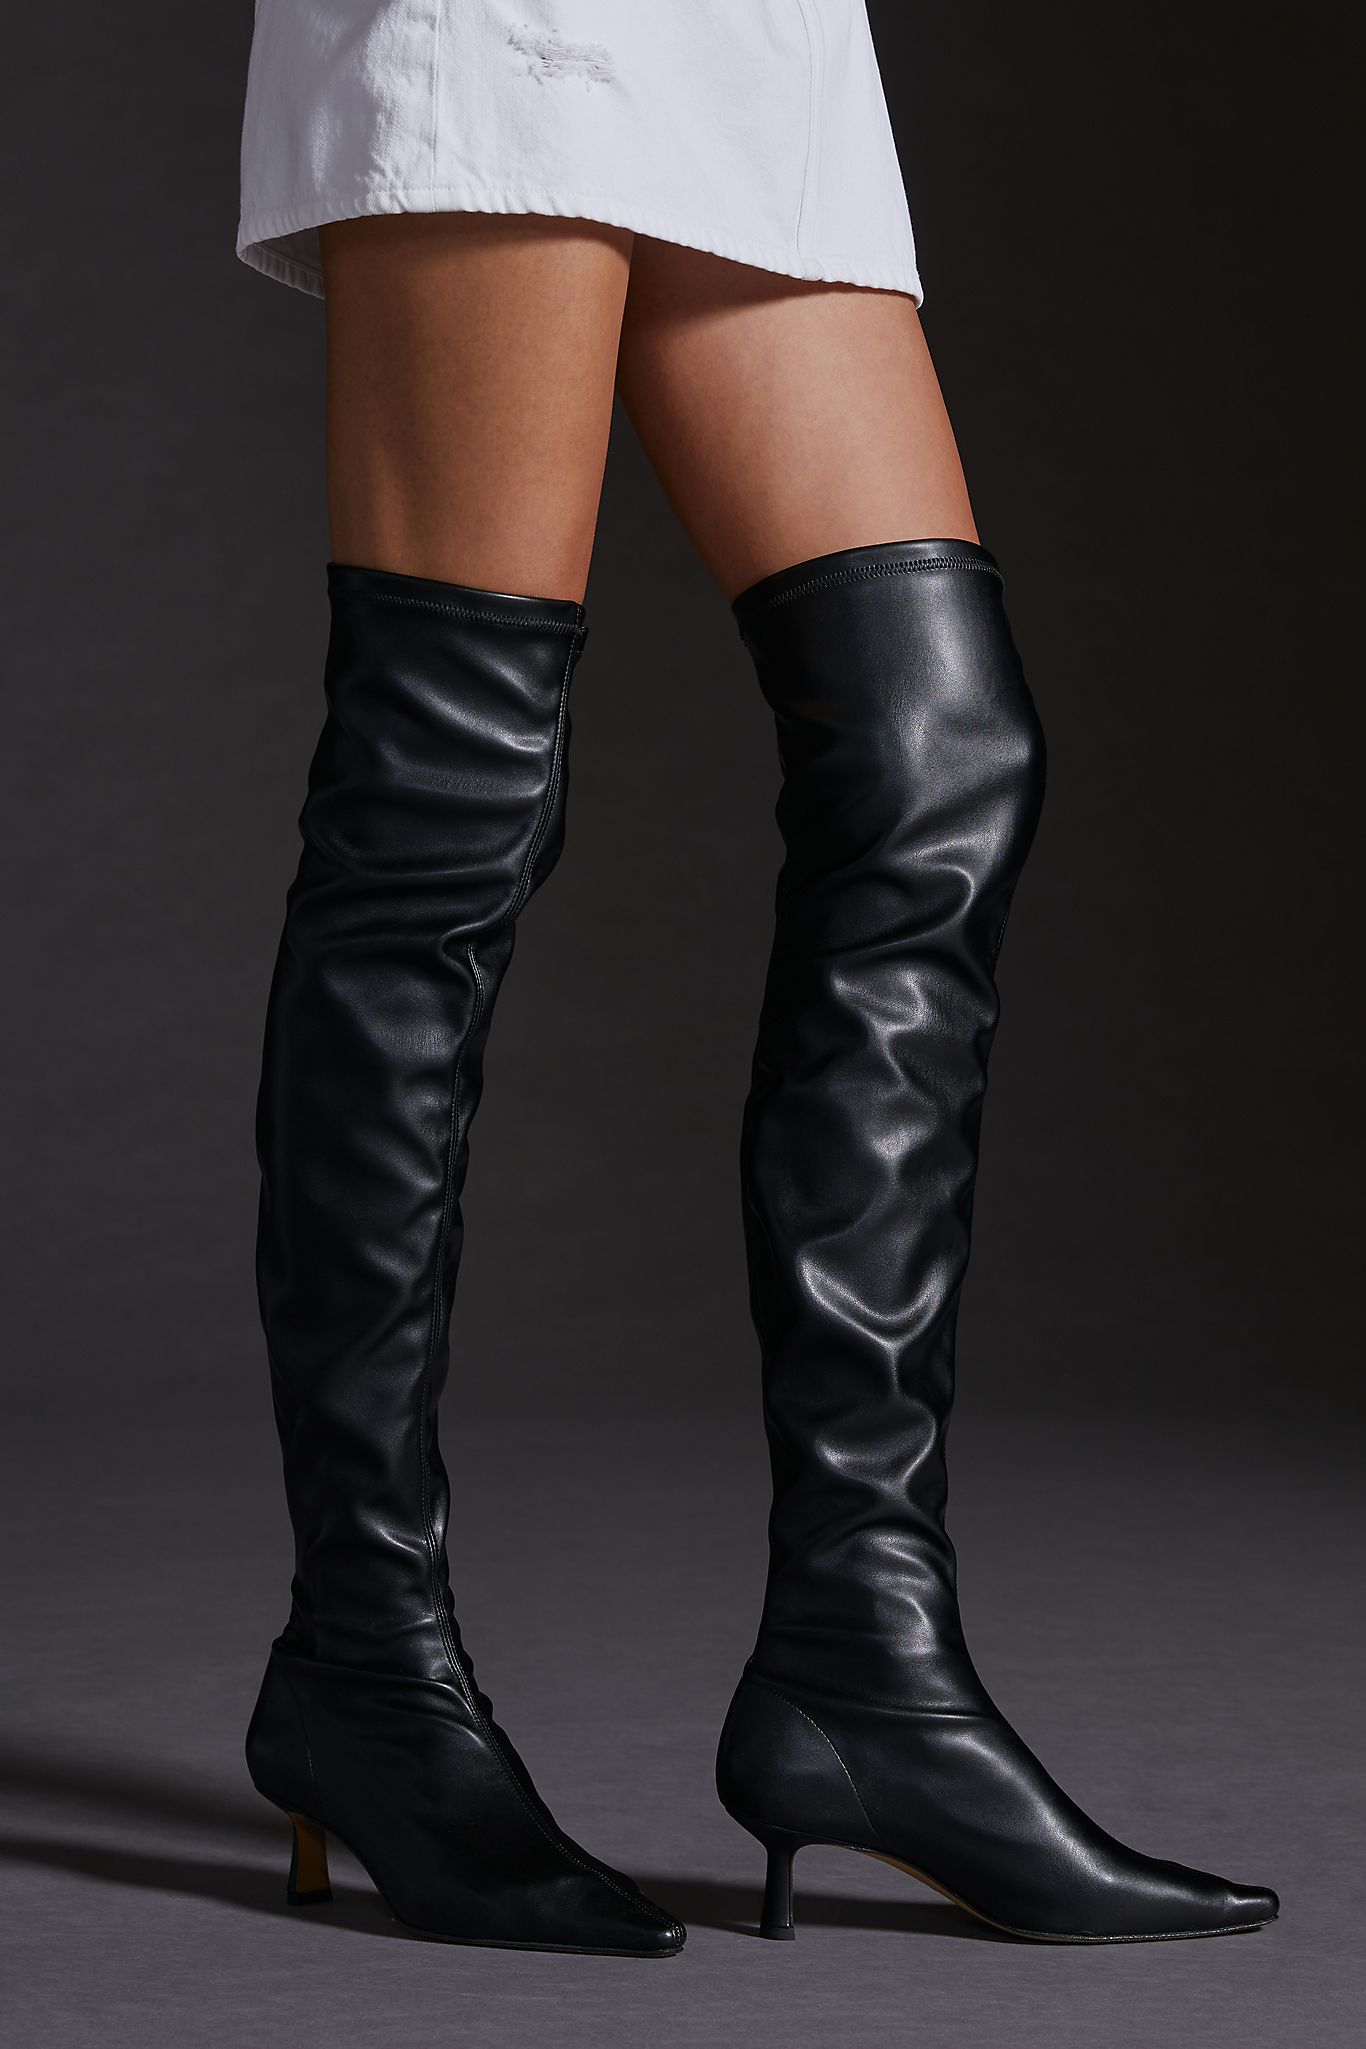 Angel Alarcon + Over-The-Knee Boots